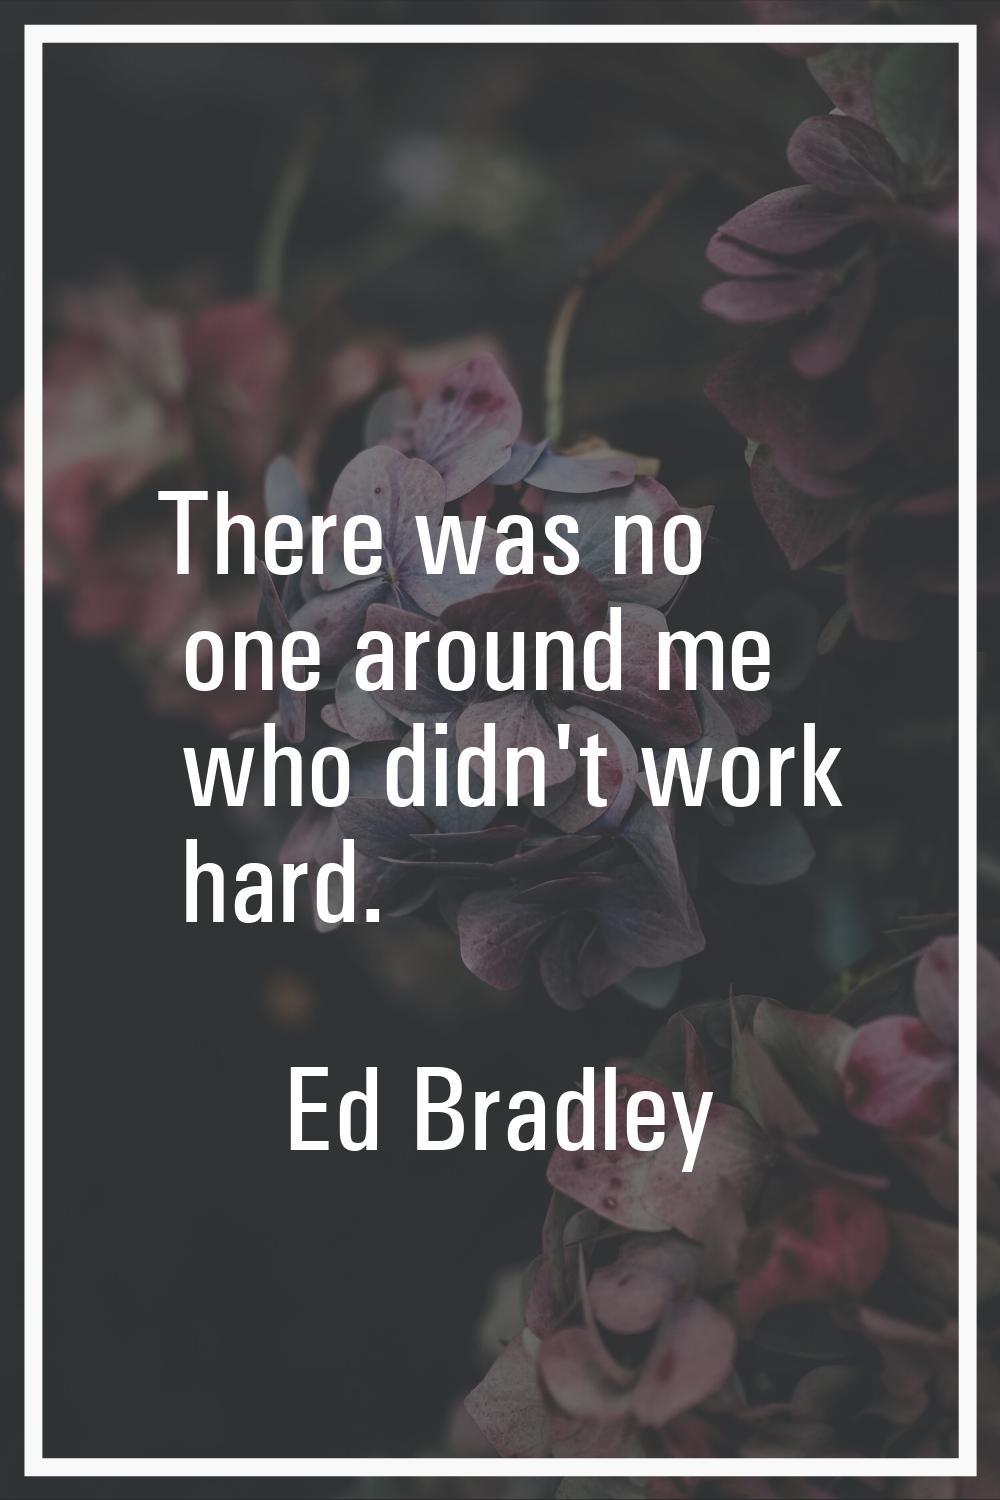 There was no one around me who didn't work hard.